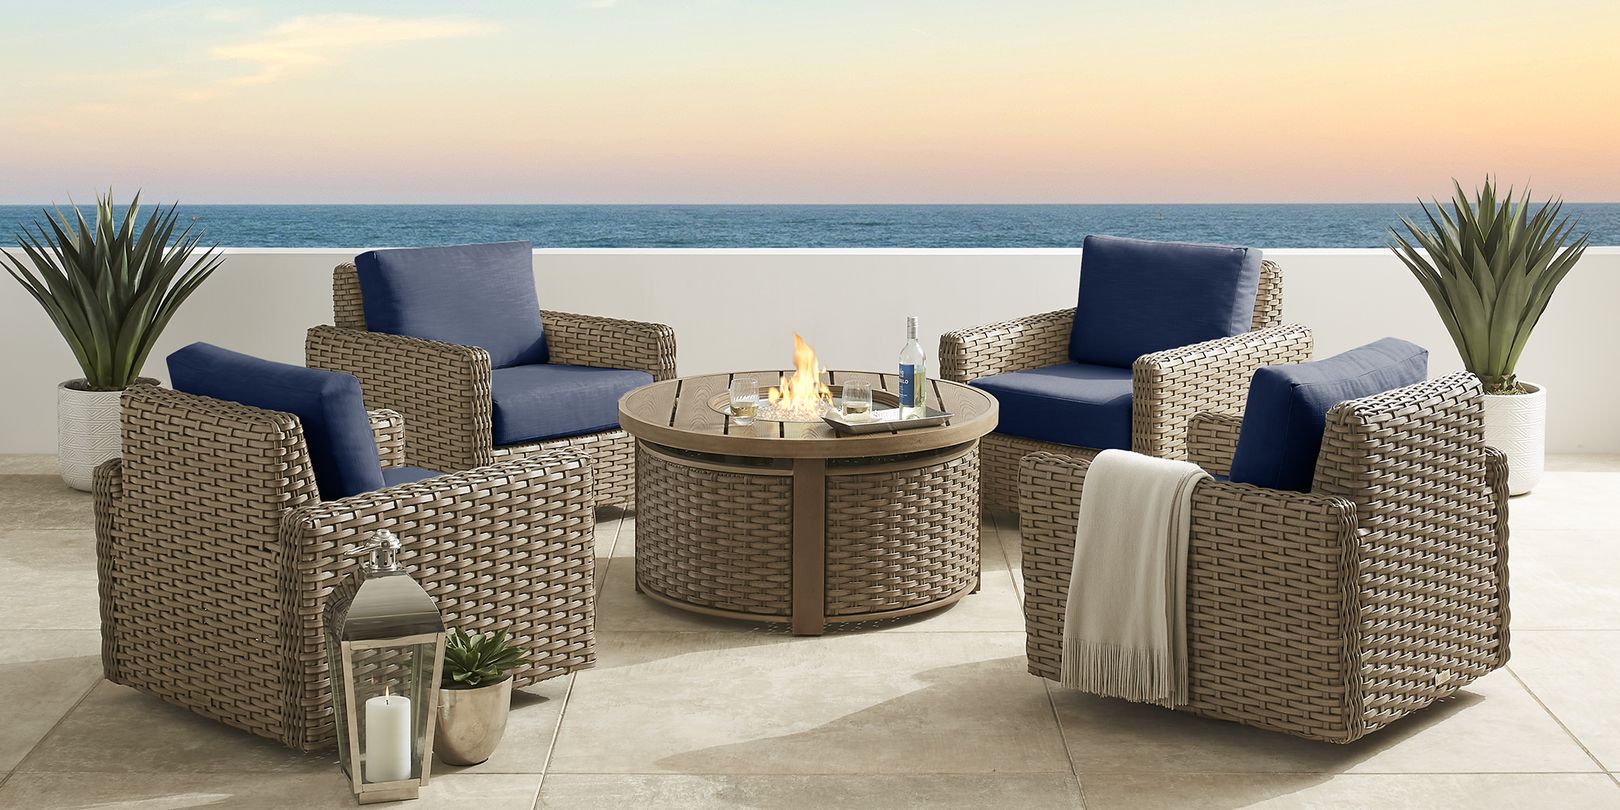 Photo of wicker fire pit surrounded by four wicker patio chairs